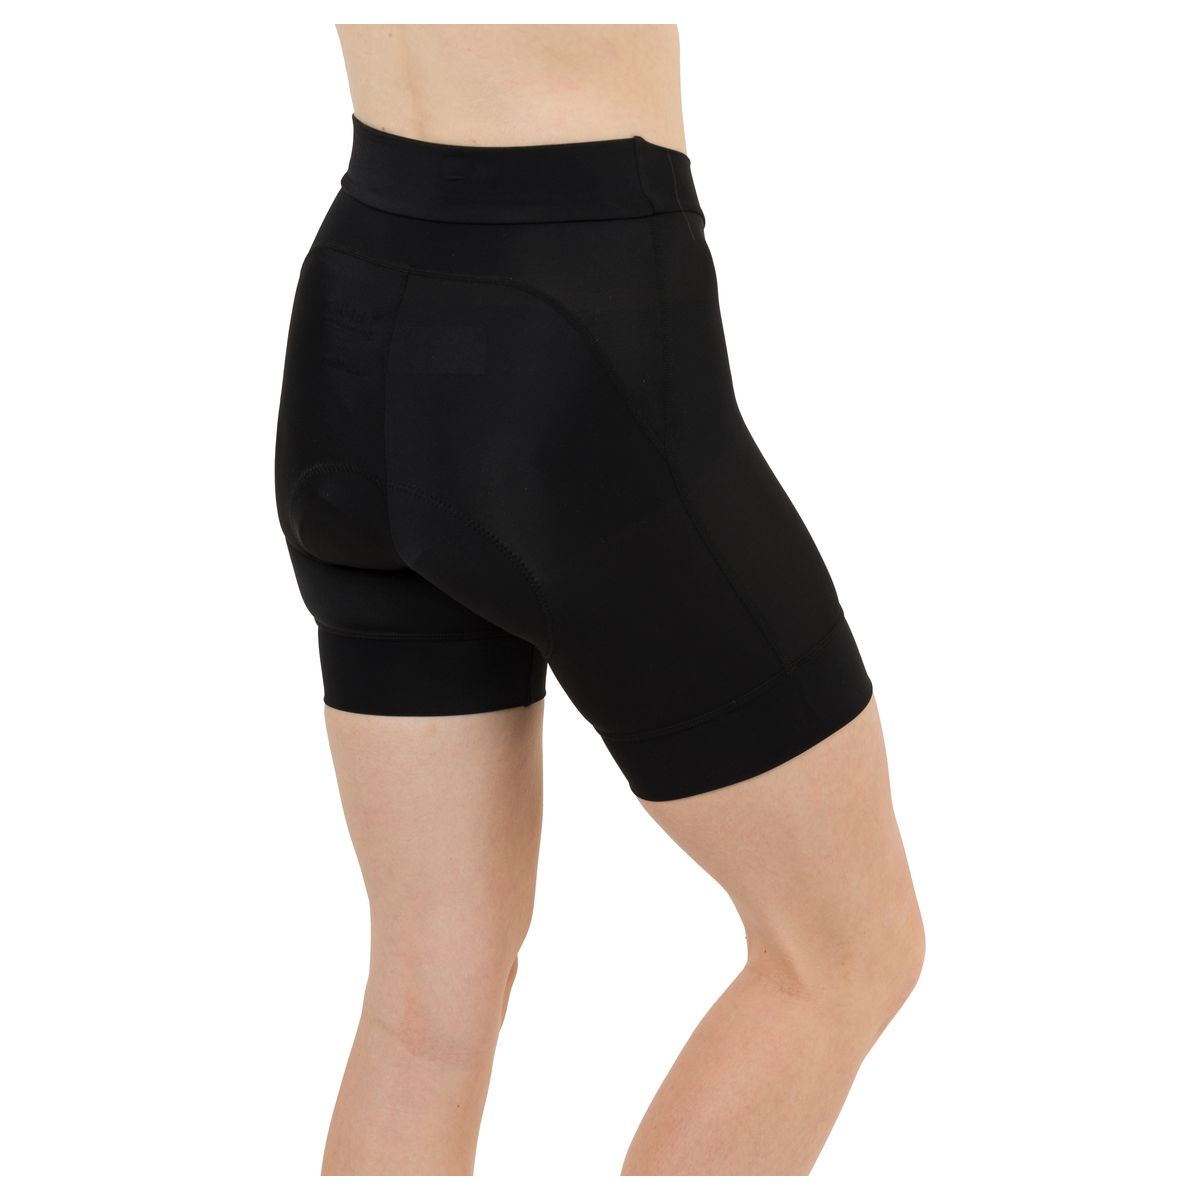 Shorty II Essential Women fit example